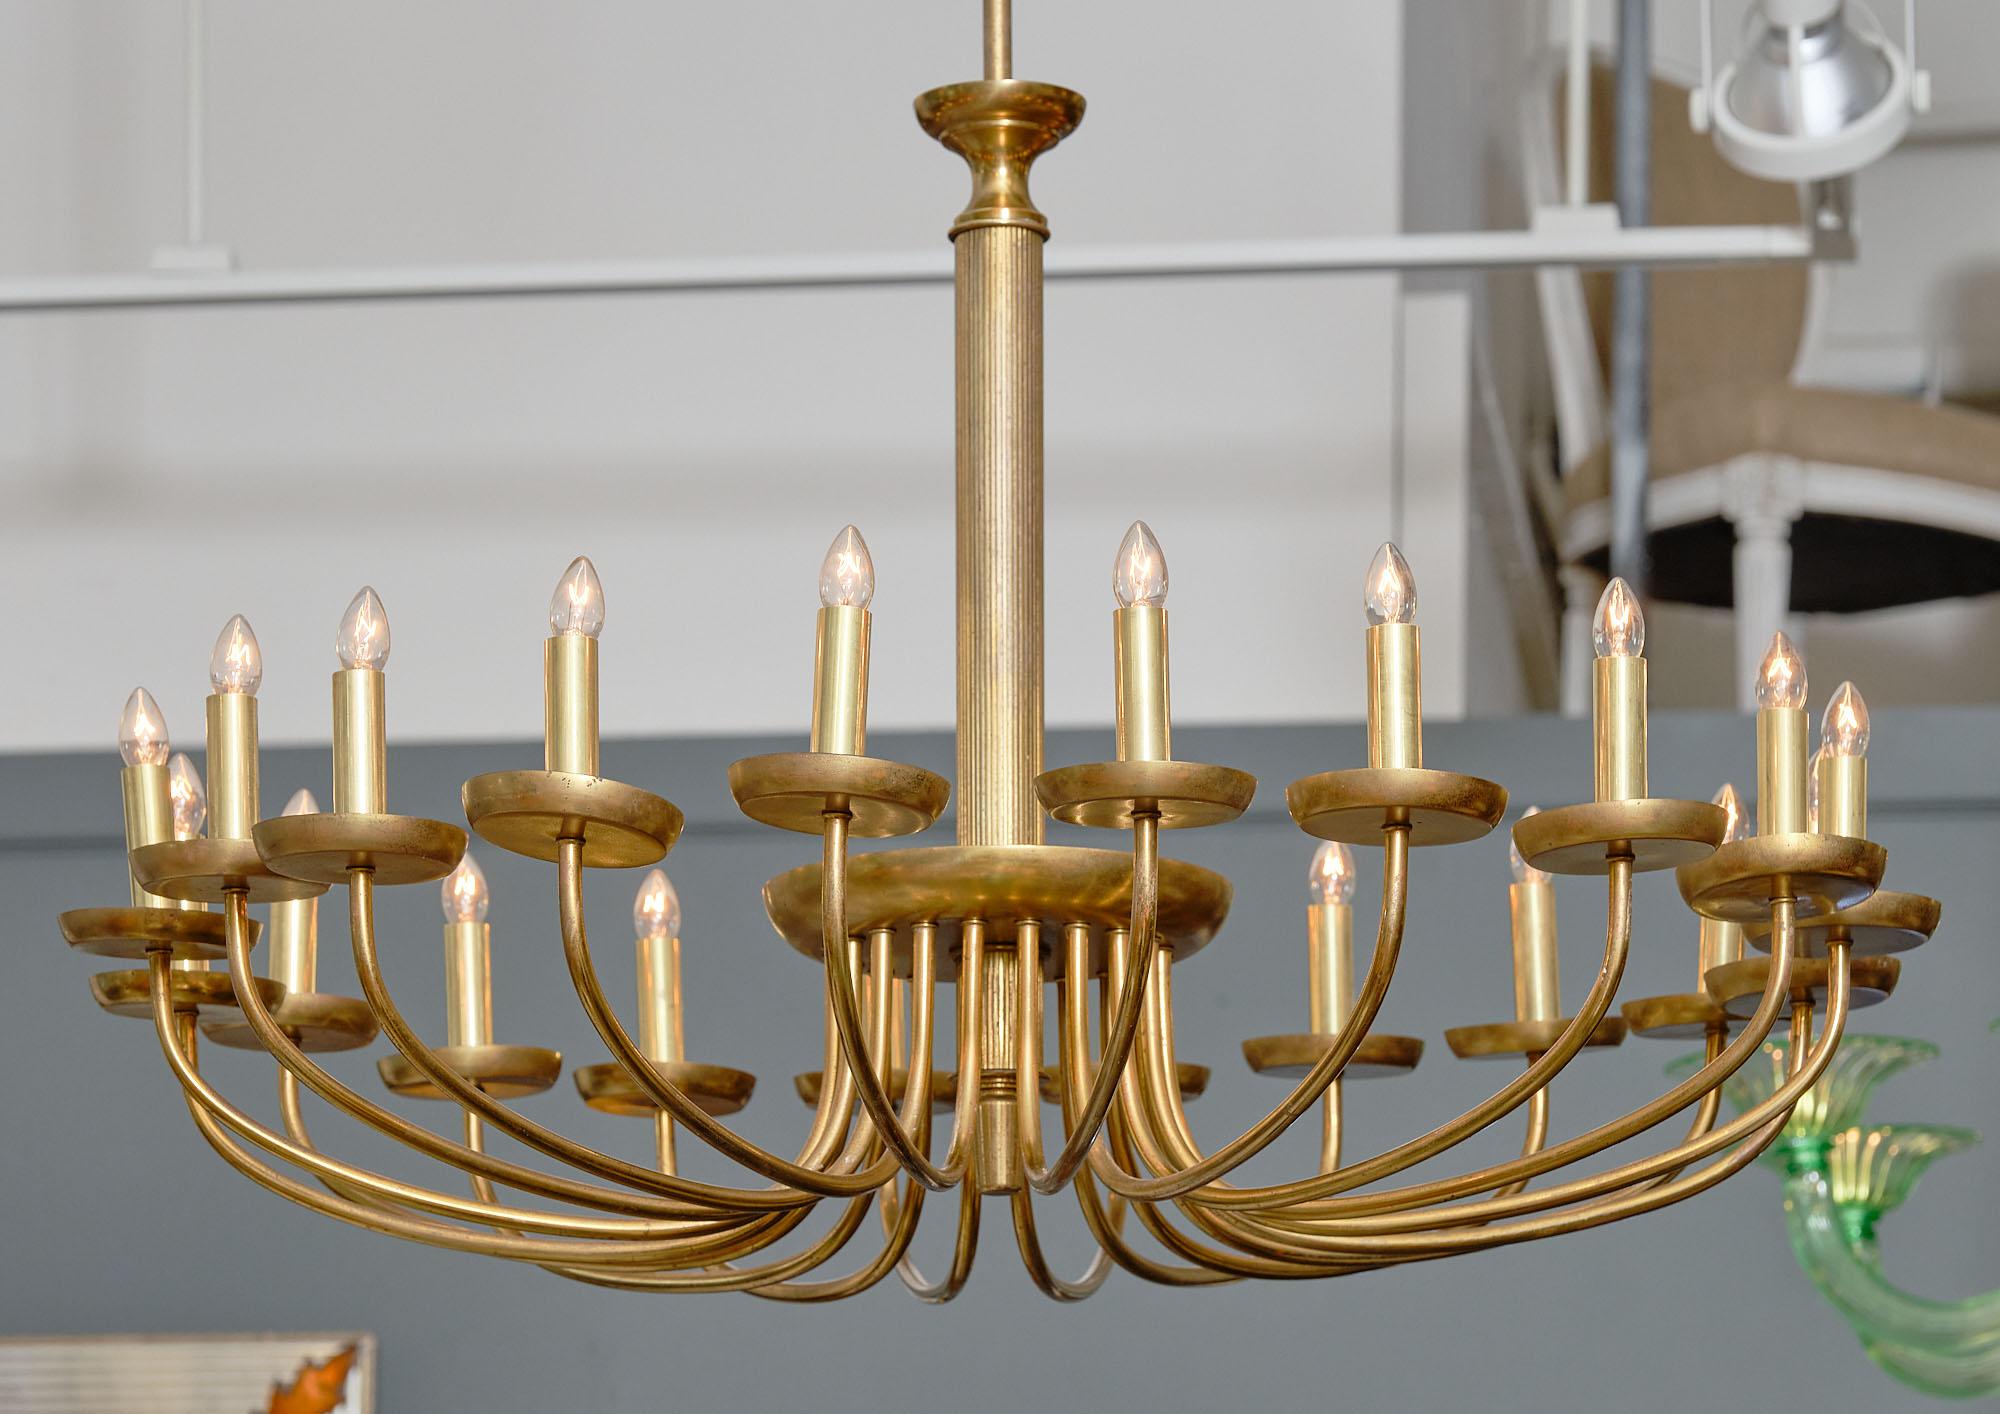 Italian mid-century brass chandelier with 20 branches. This piece is made of solid brass and has been newly wired to US standards.